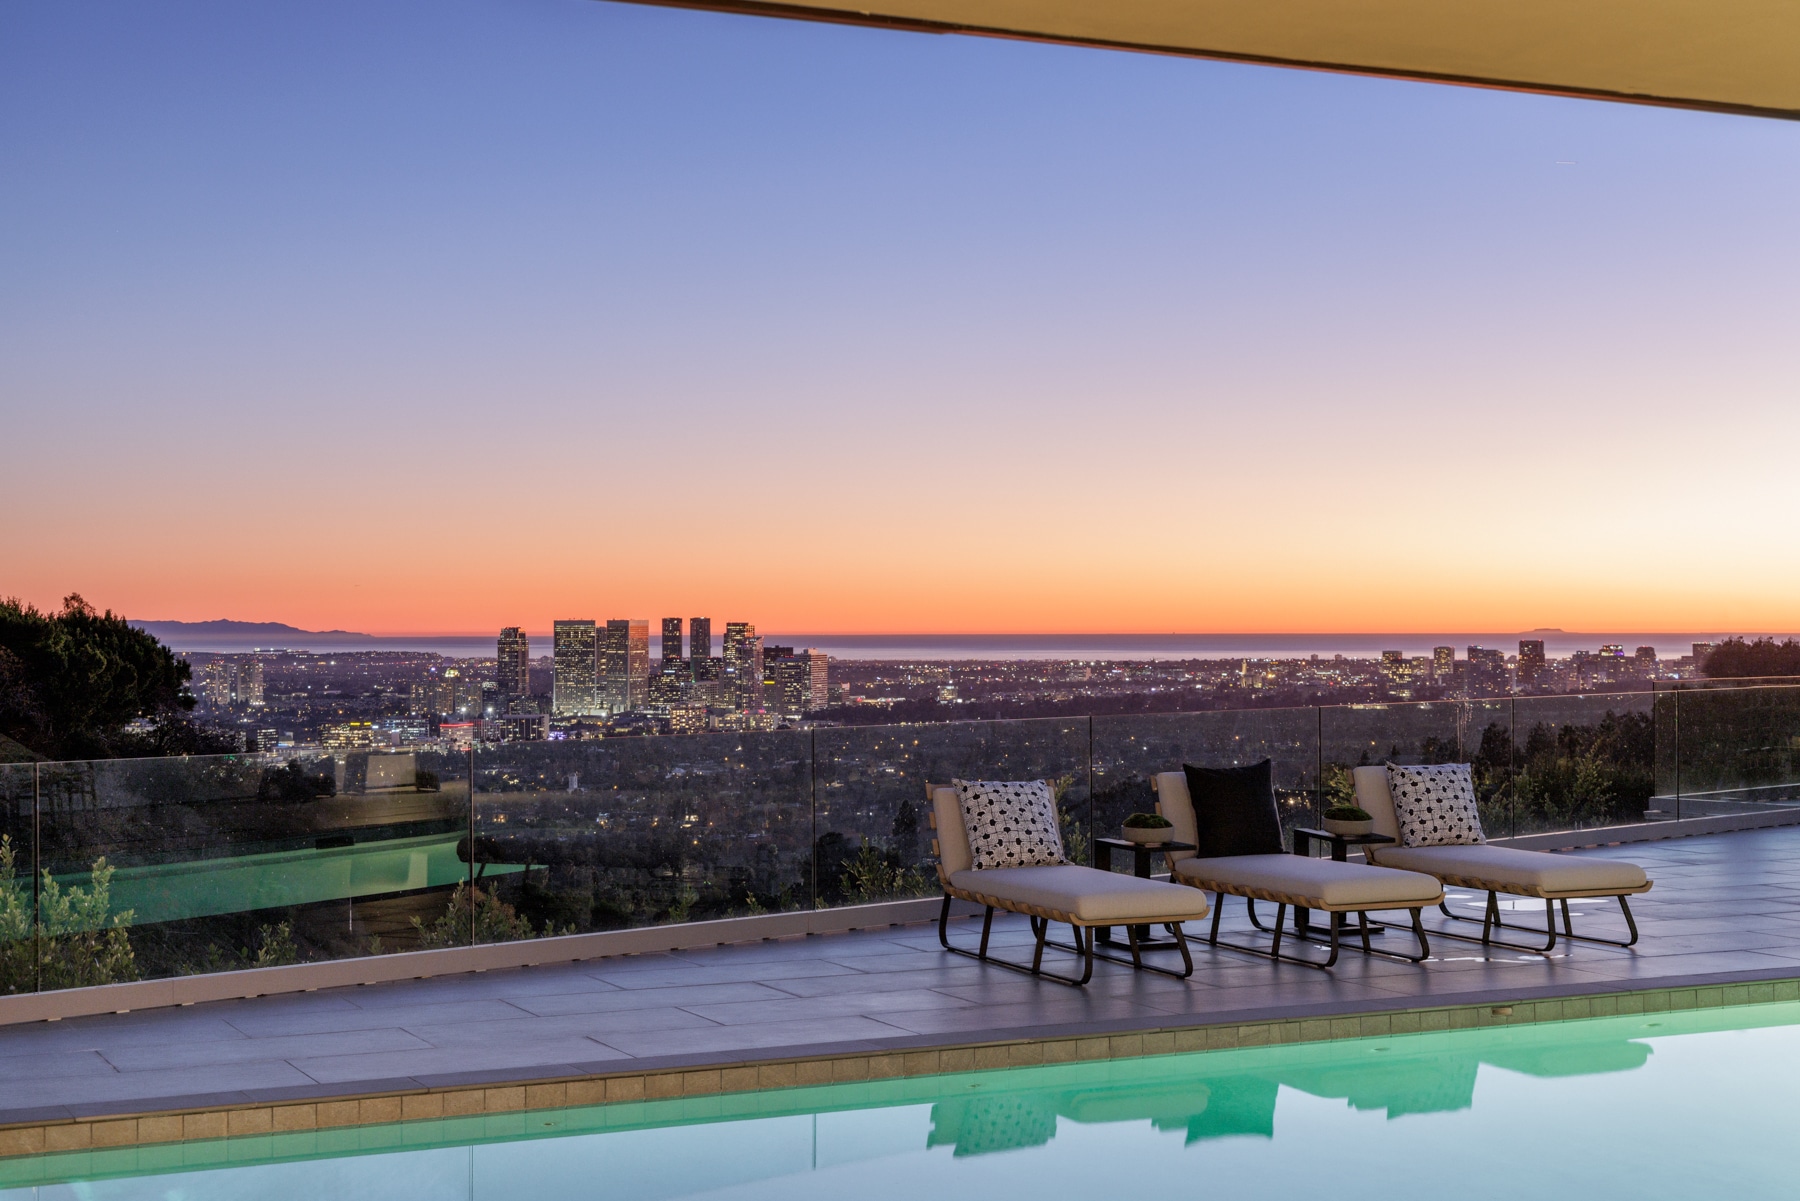 David Spade’s Los Angeles Home Sells In A Flash For $19.5 Million